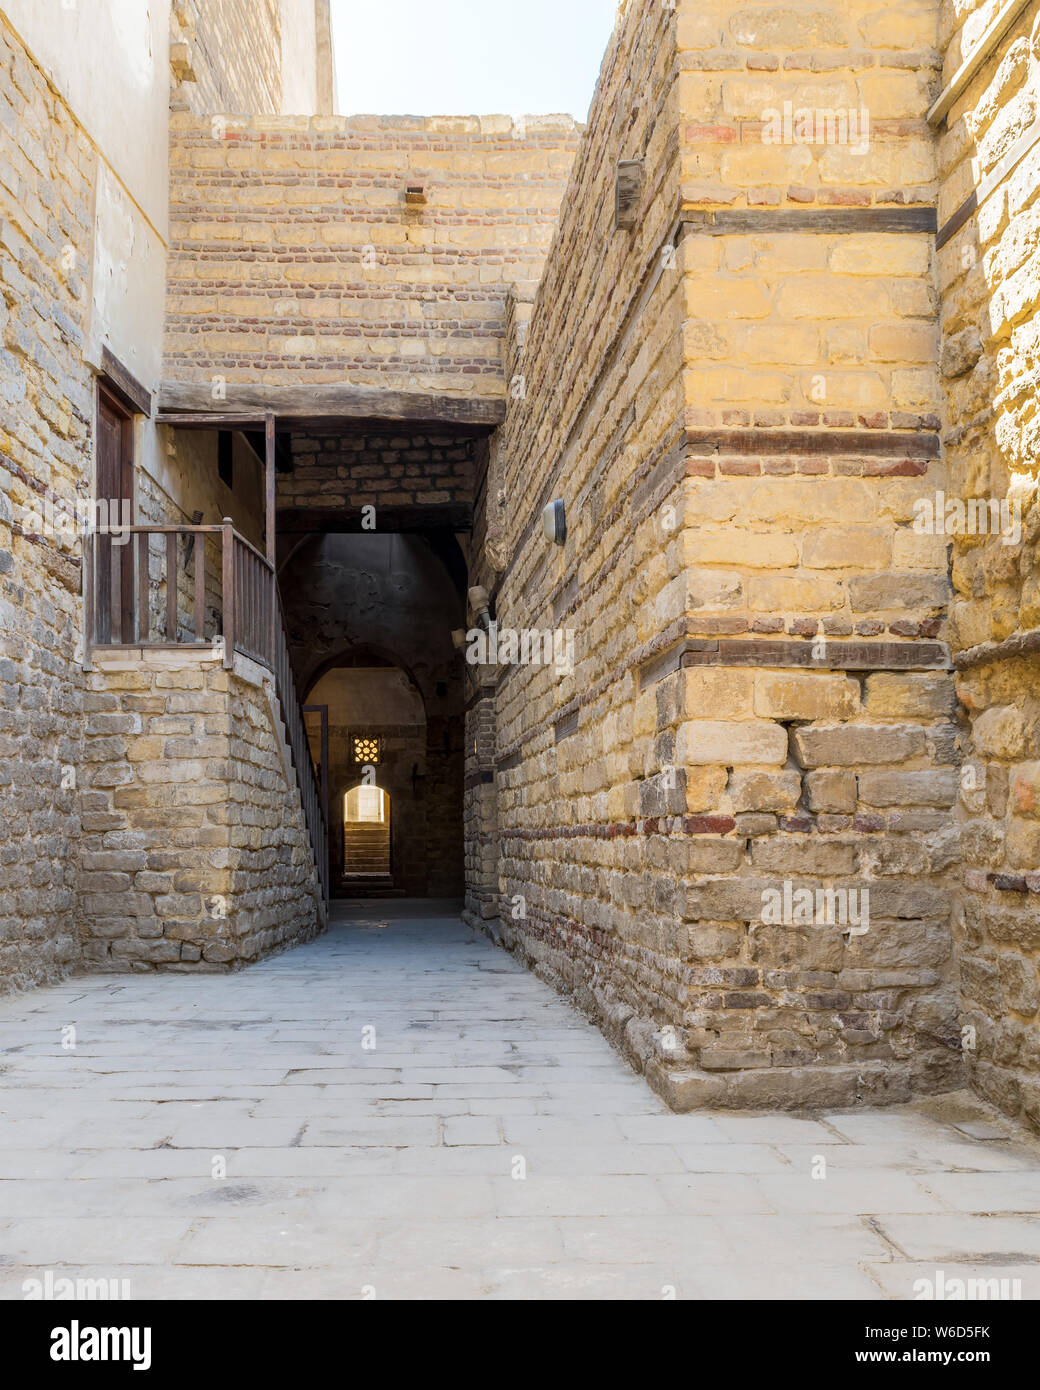 Exterior daylight shot of old abandoned stone bricks passage surrounding Sultan Qalawun Complex located in Al Moez Street, Cairo, Egypt Stock Photo